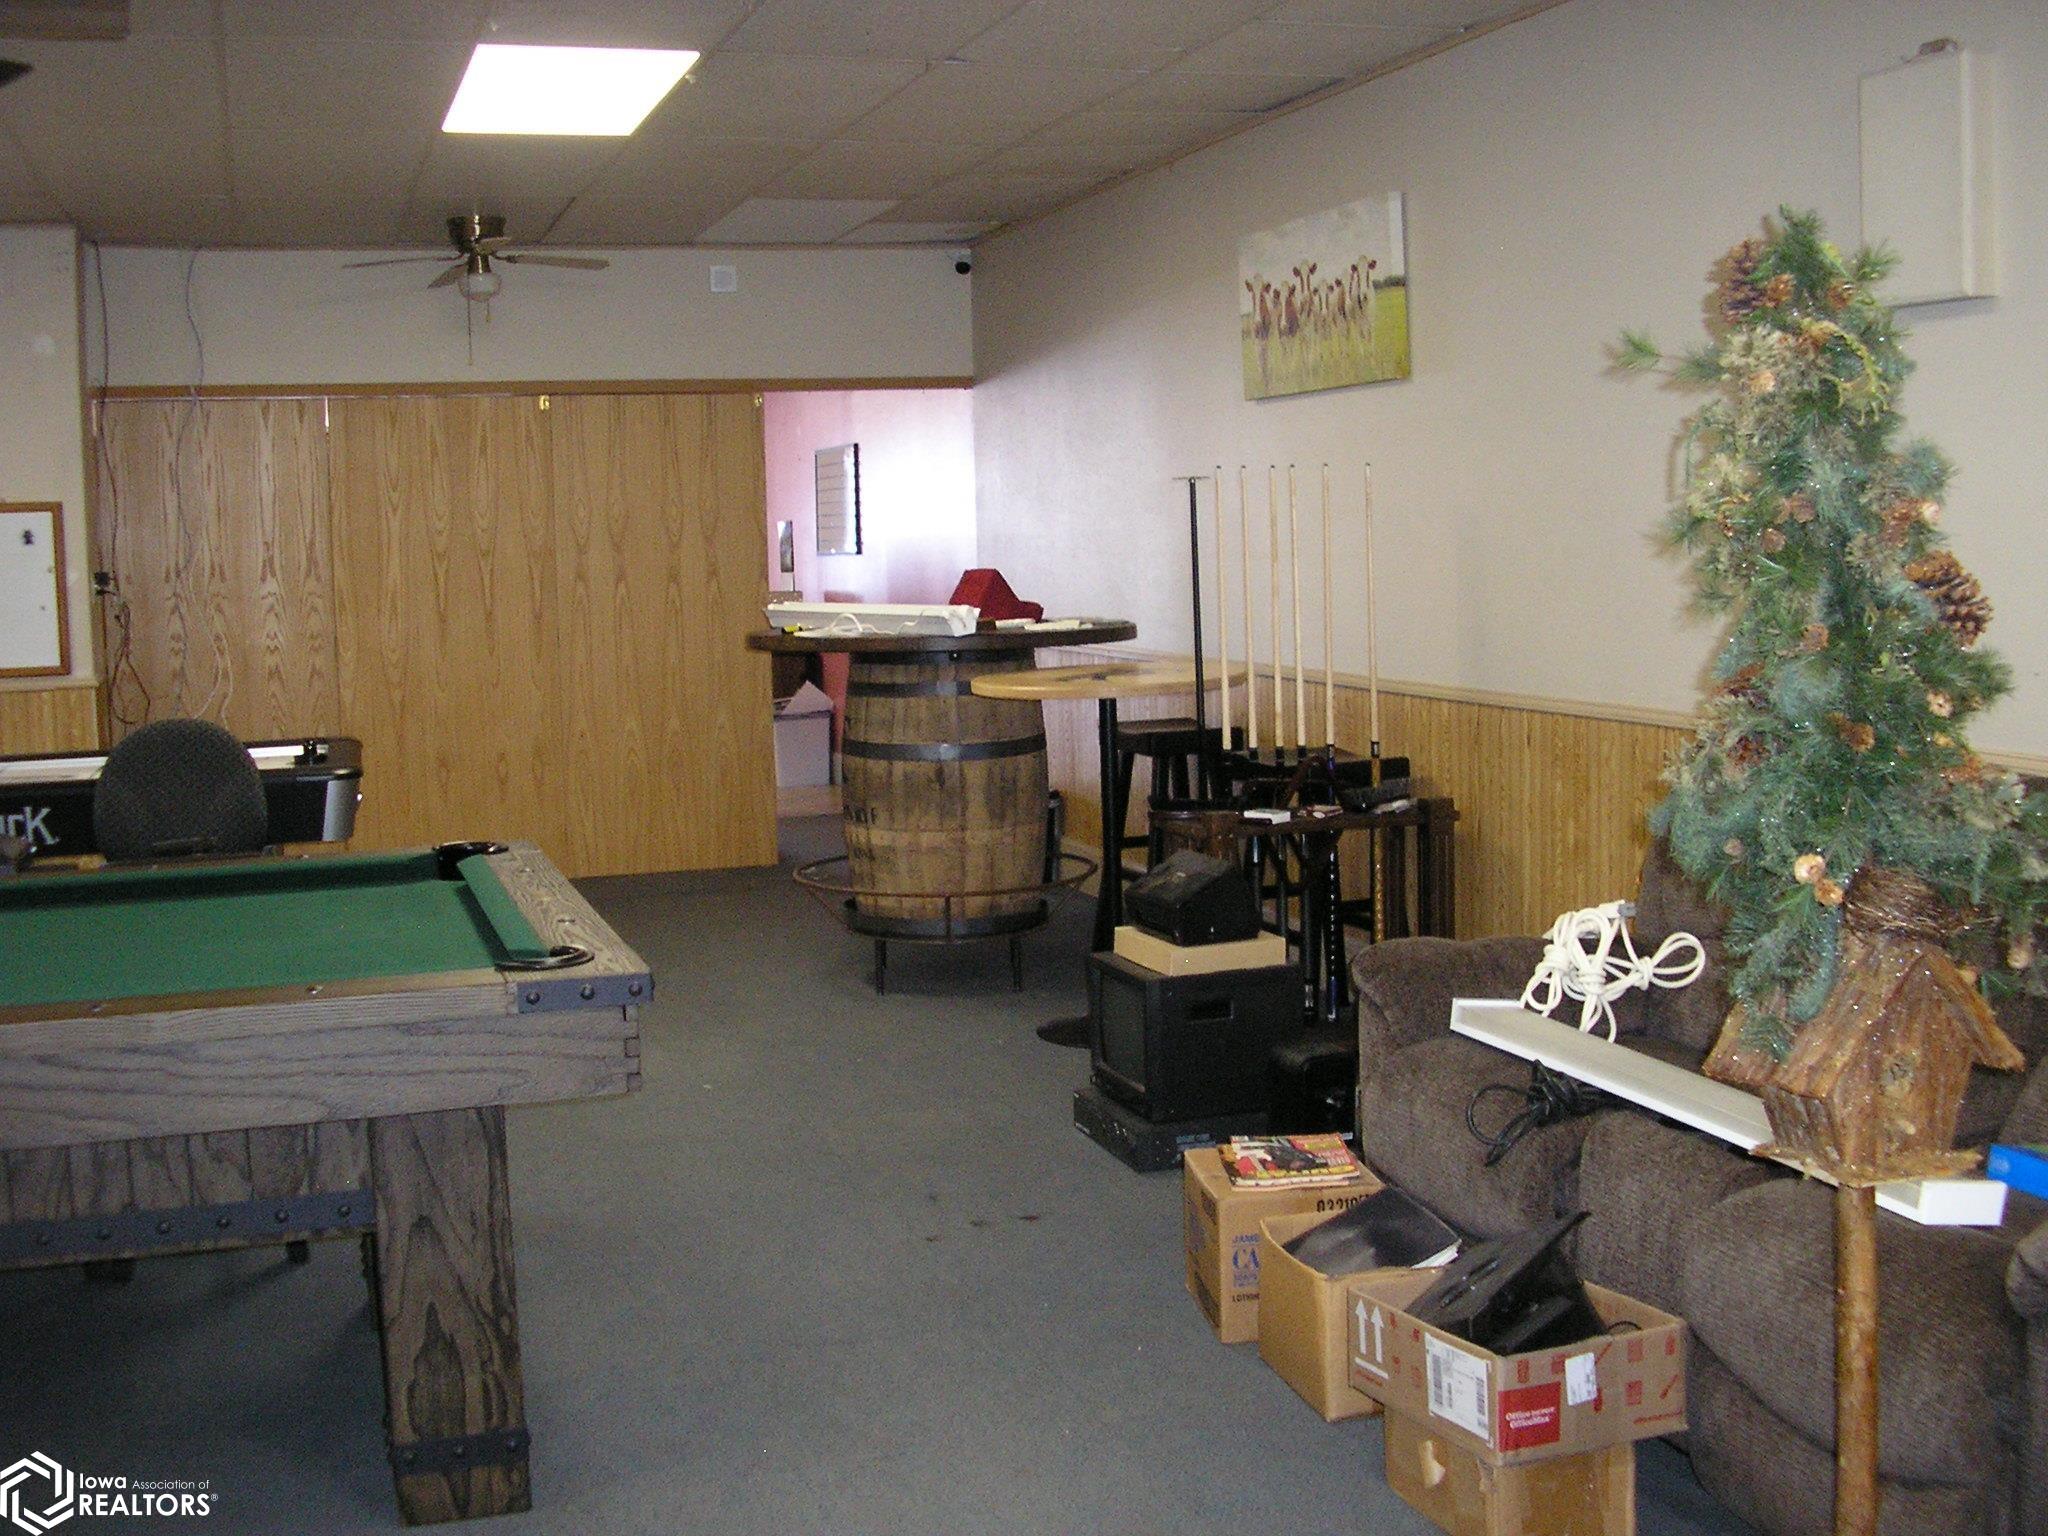 511 Main, Griswold, Iowa 51535, ,Commercial (5+ Units),For Sale,Main,6315815